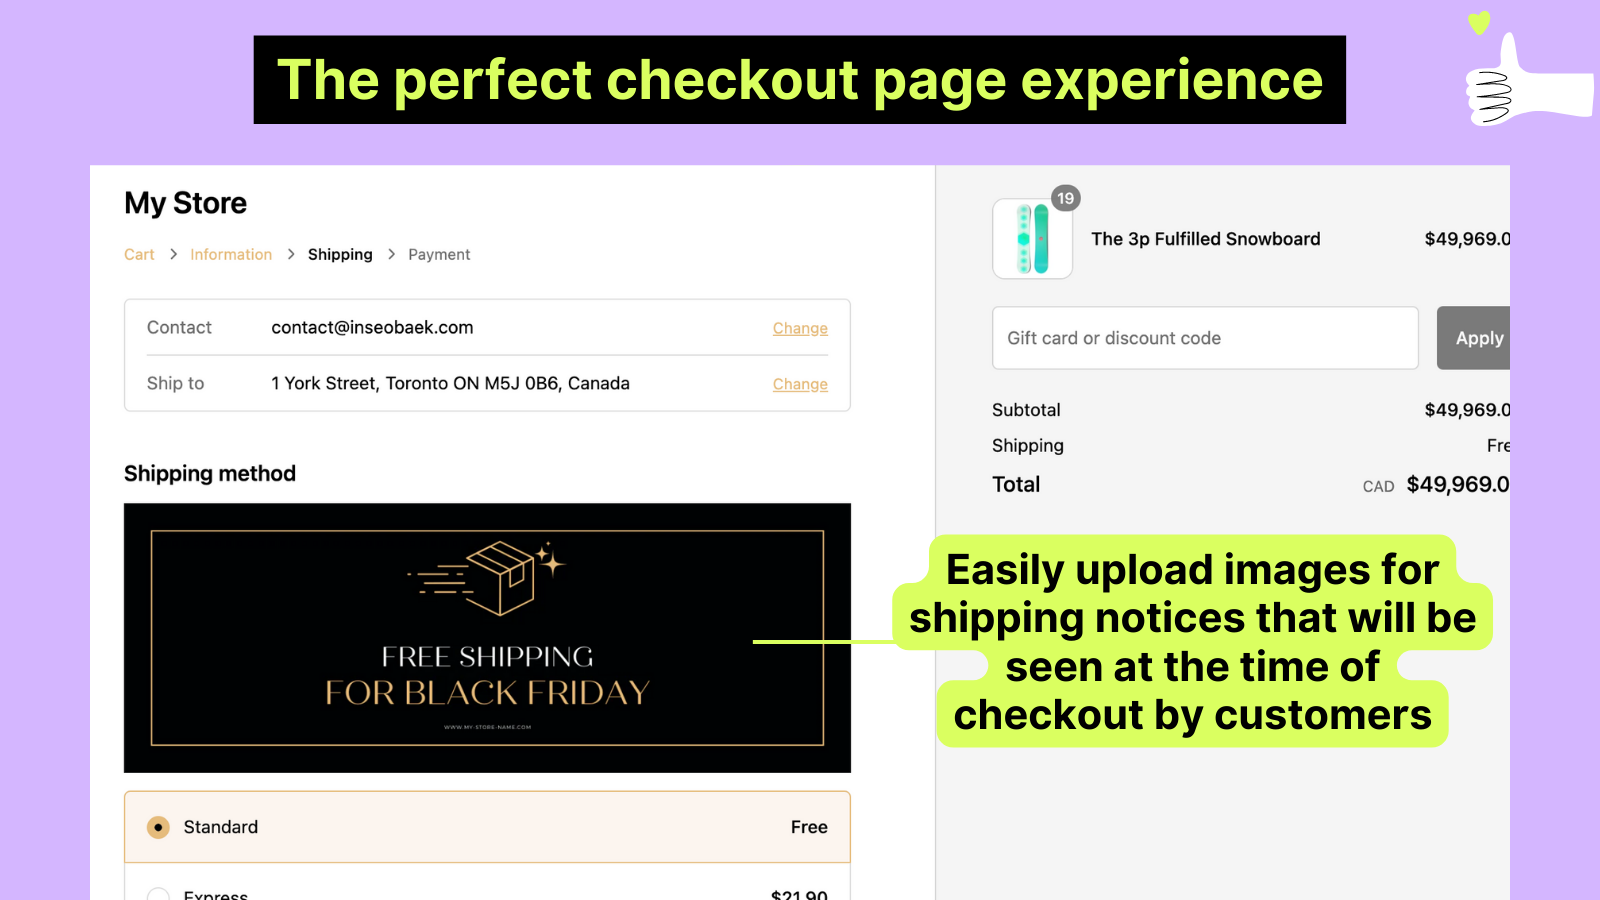 customize checkout experience by providing shipping notices